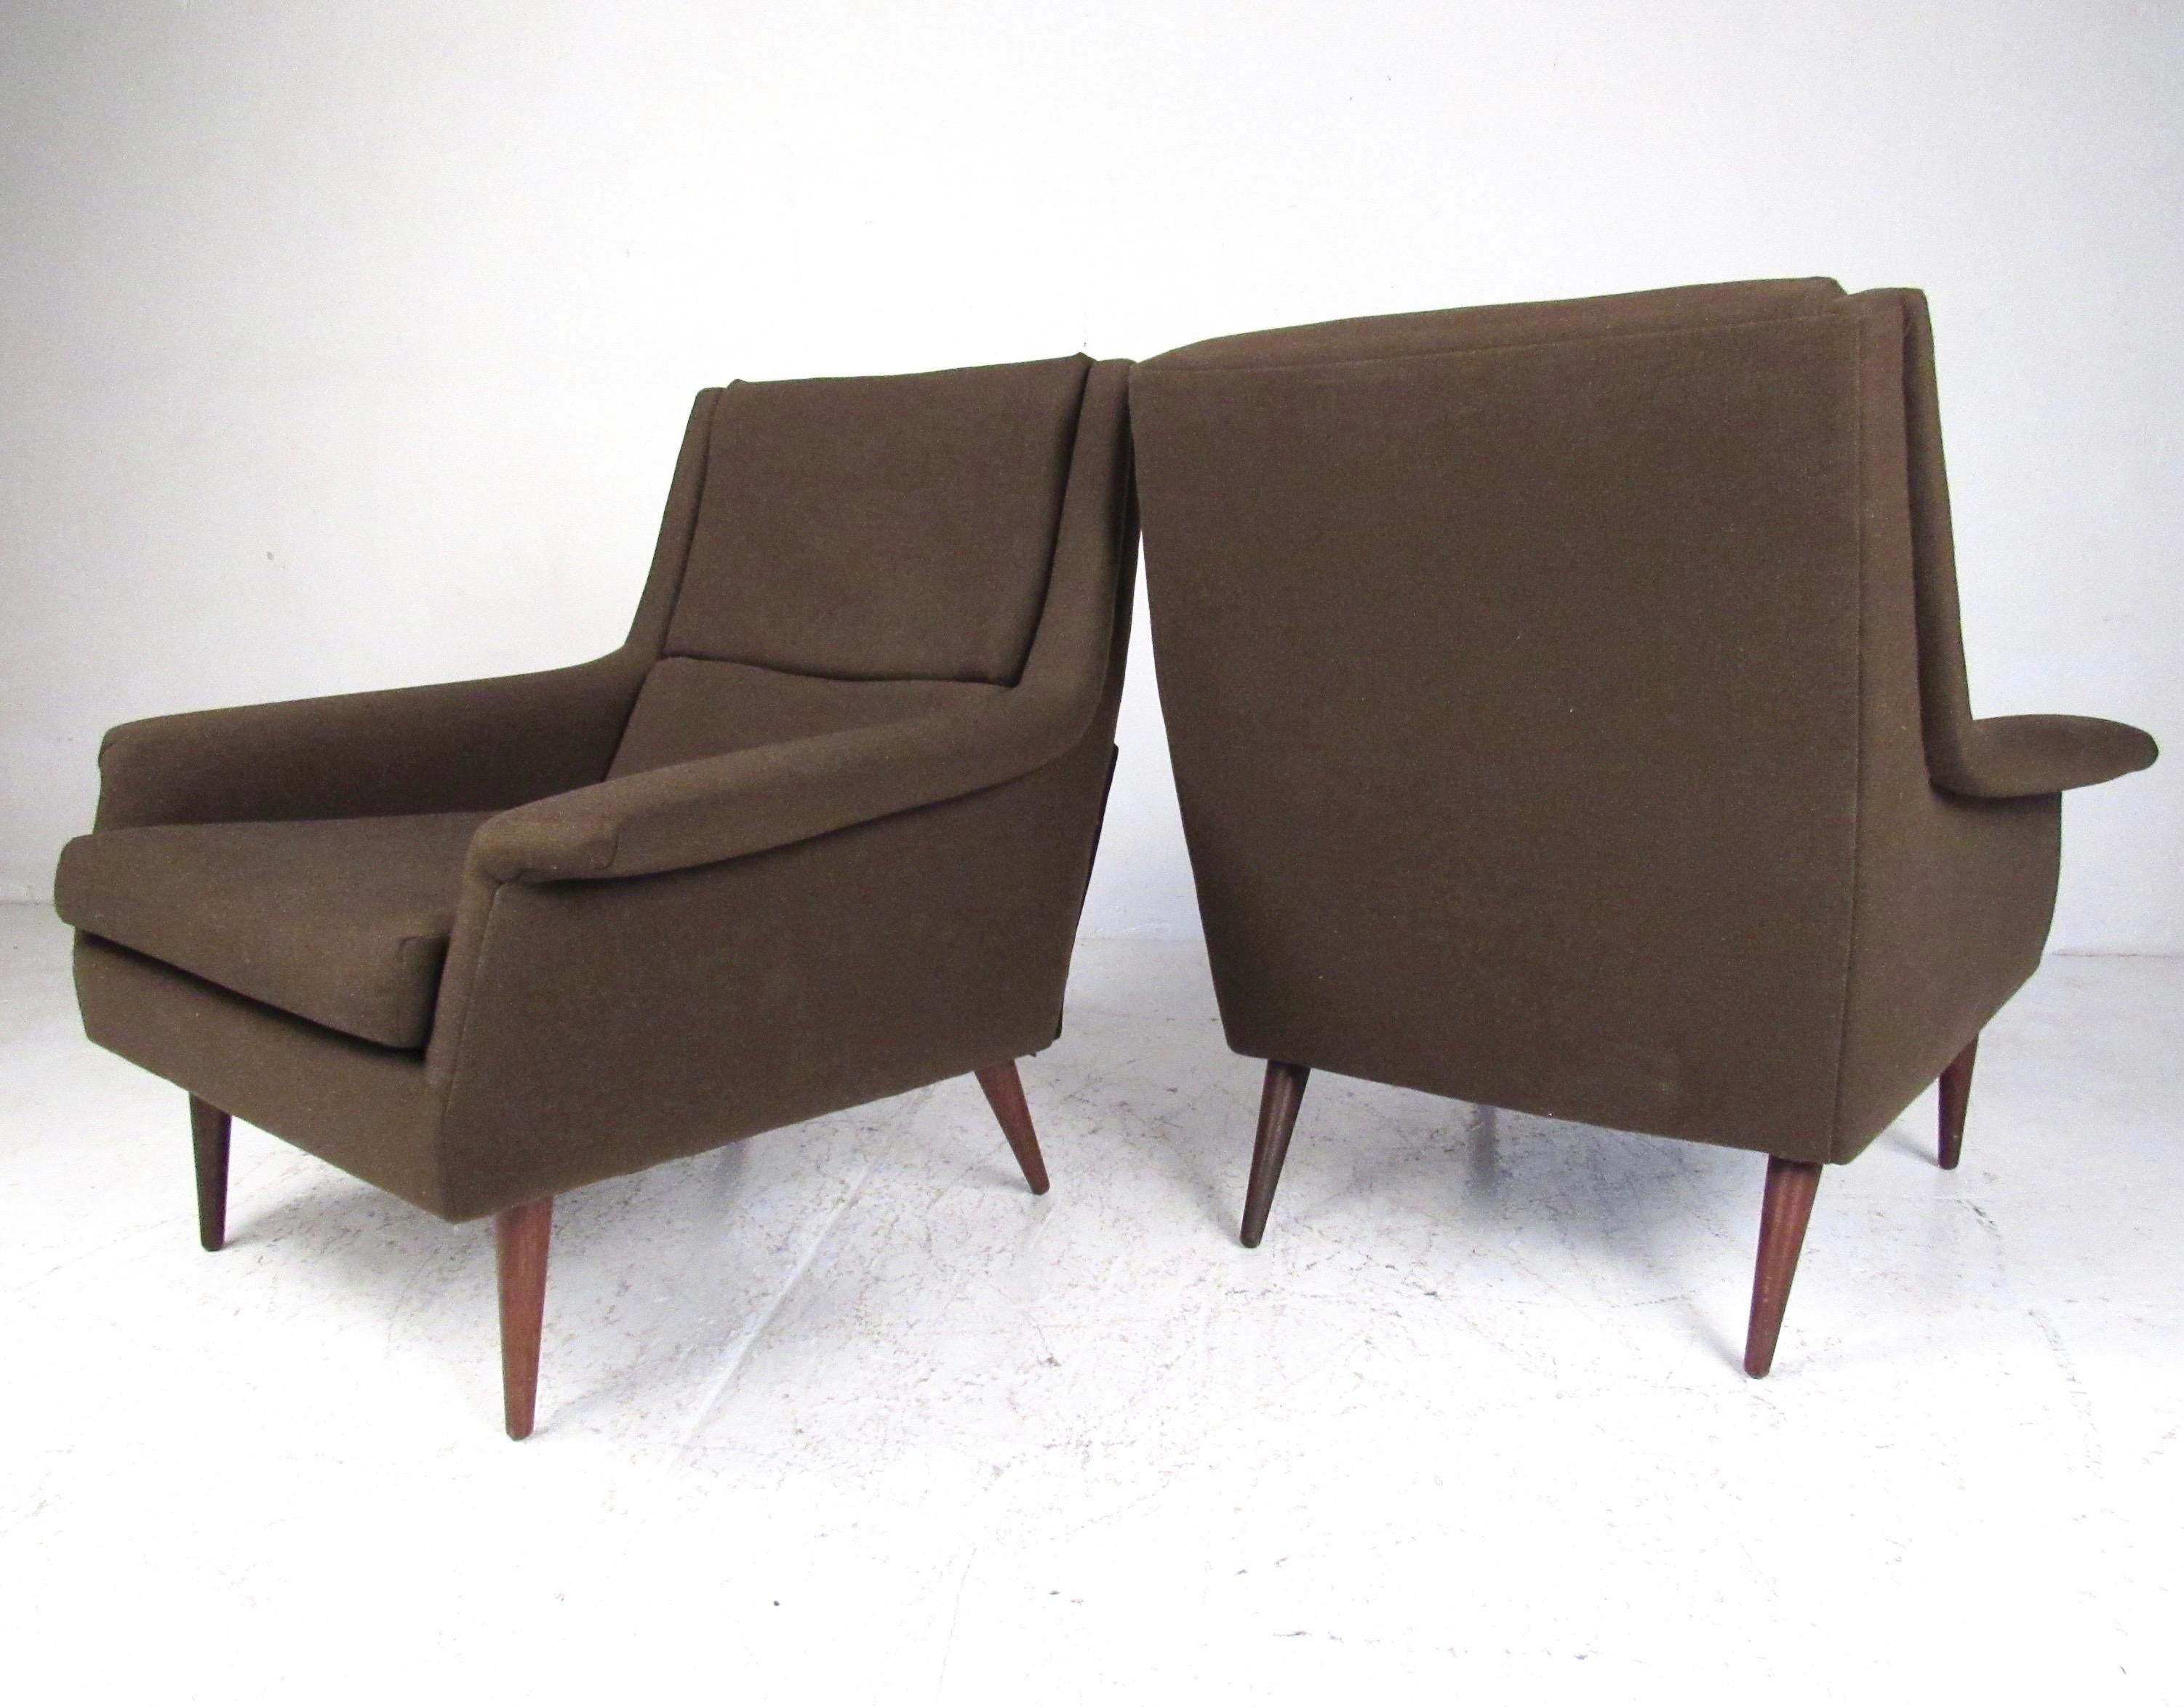 American Pair of Milo Baughman Upholstered Lounge Chairs For Sale